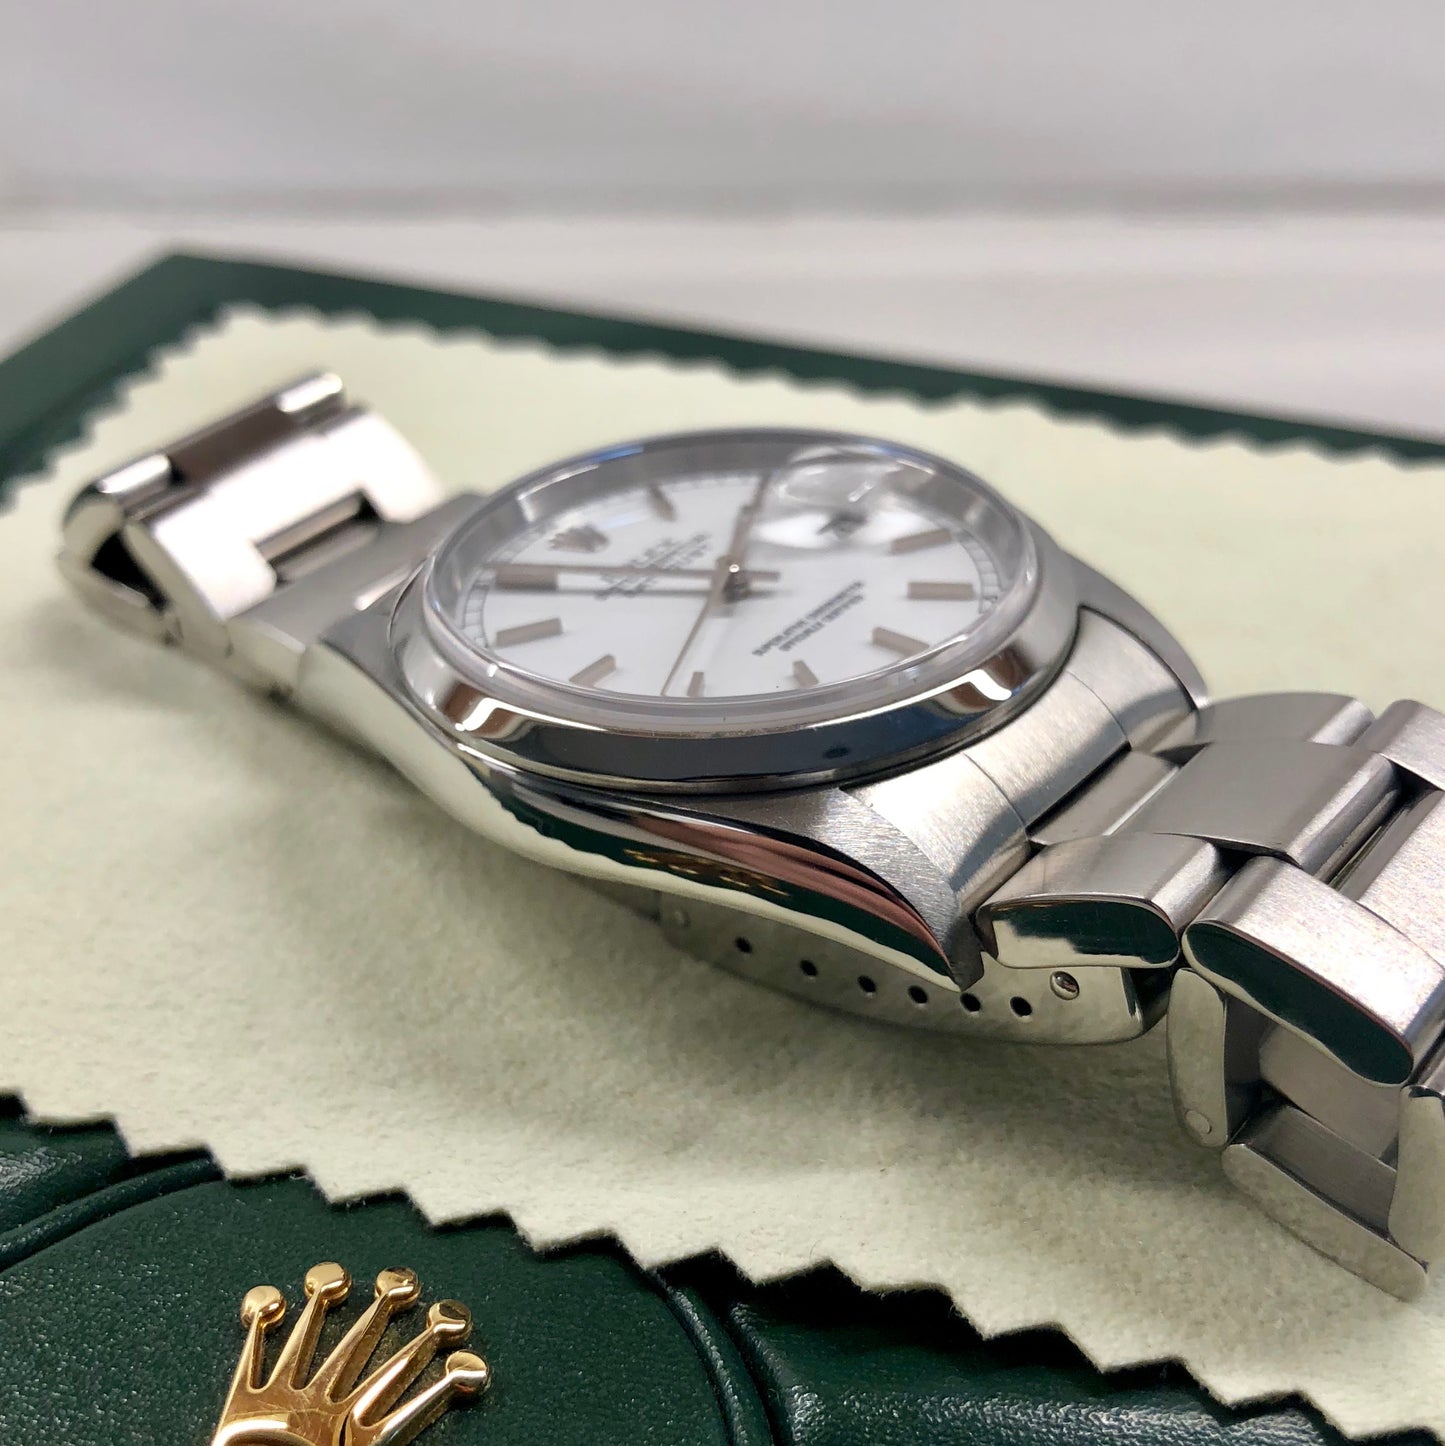 Rolex Datejust 16200 Oyster Perpetual Cal. 3135 White Stick "Y" Serial Wristwatch - Hashtag Watch Company